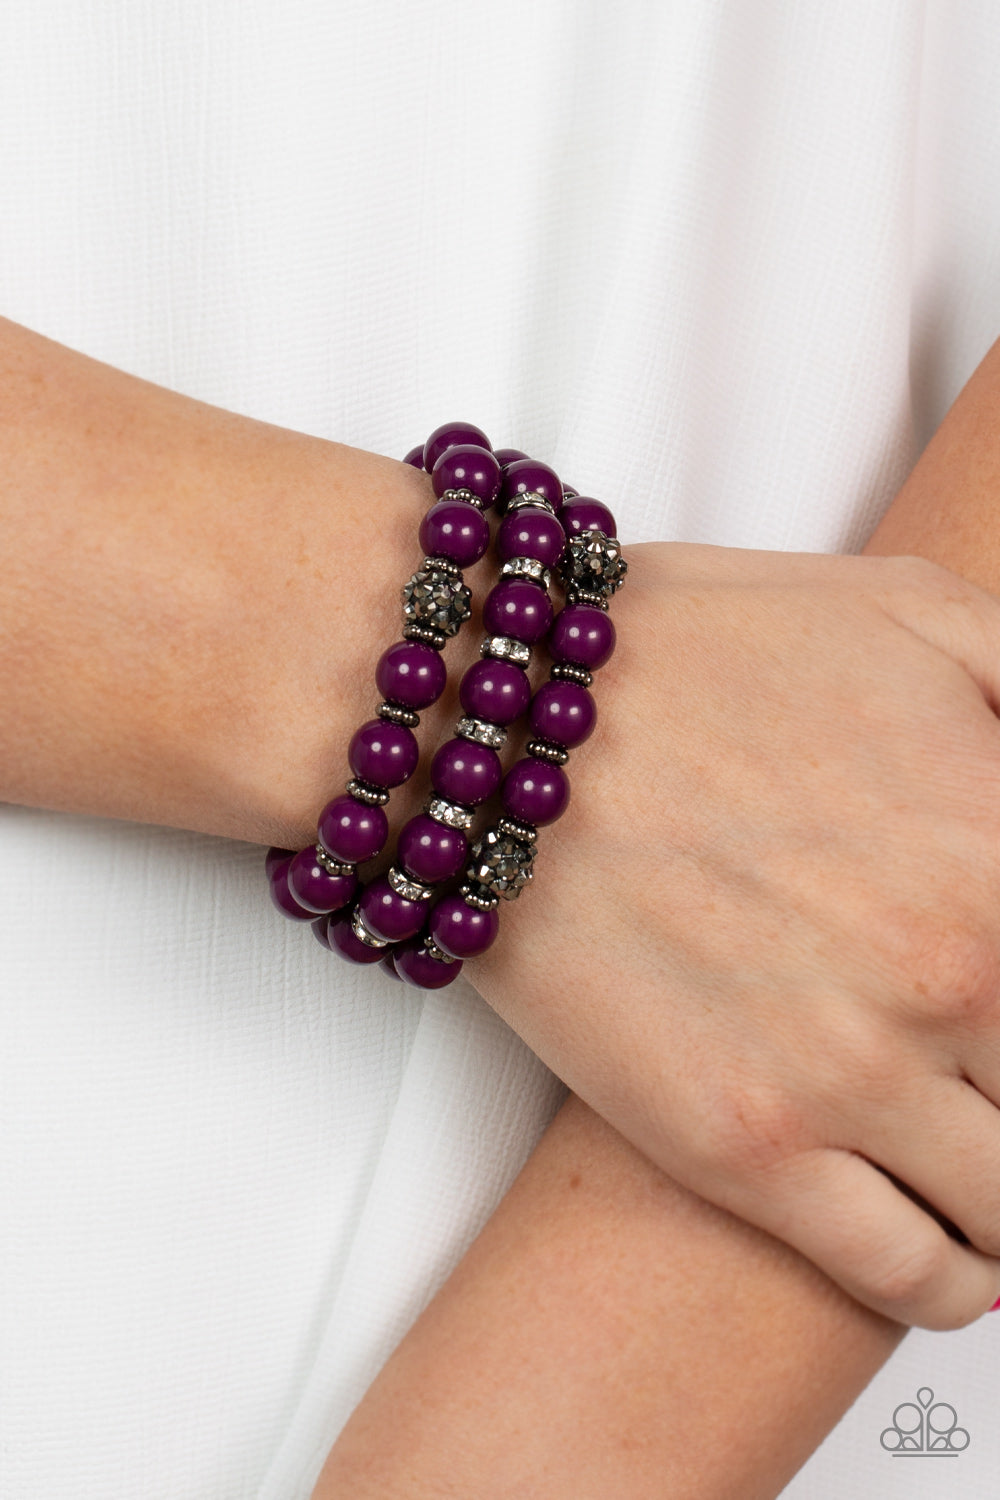 Paparazzi Accessories Poshly Packing - Purple Stretchy Bracelets a posh collection of polished purple beads, studded gunmetal rings, white rhinestone encrusted rings, and hematite dotted beads are threaded along stretchy bands around the wrist, creating sassy layers.  Featured inside The Preview at GLOW!  Sold as one set of three bracelets.